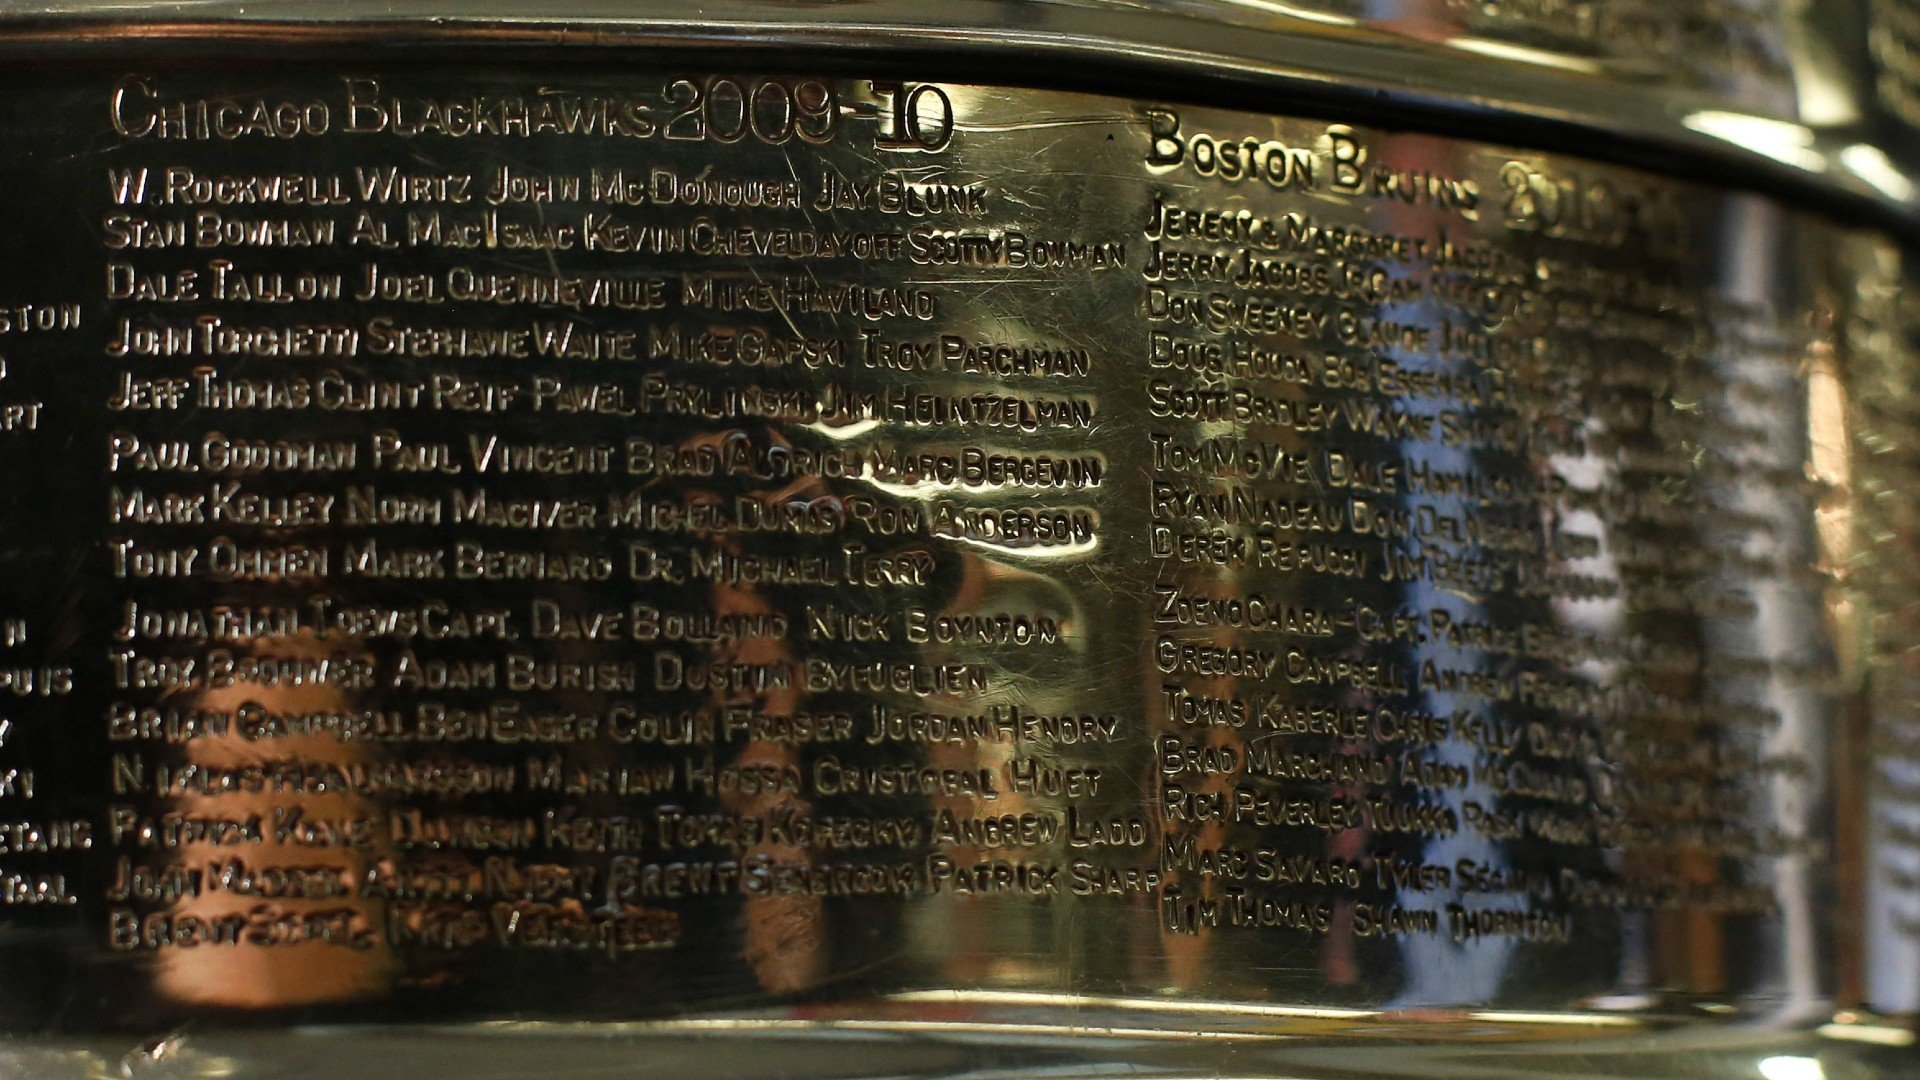 Hall of Fame Covers Brad Aldrich's Name on Stanley Cup